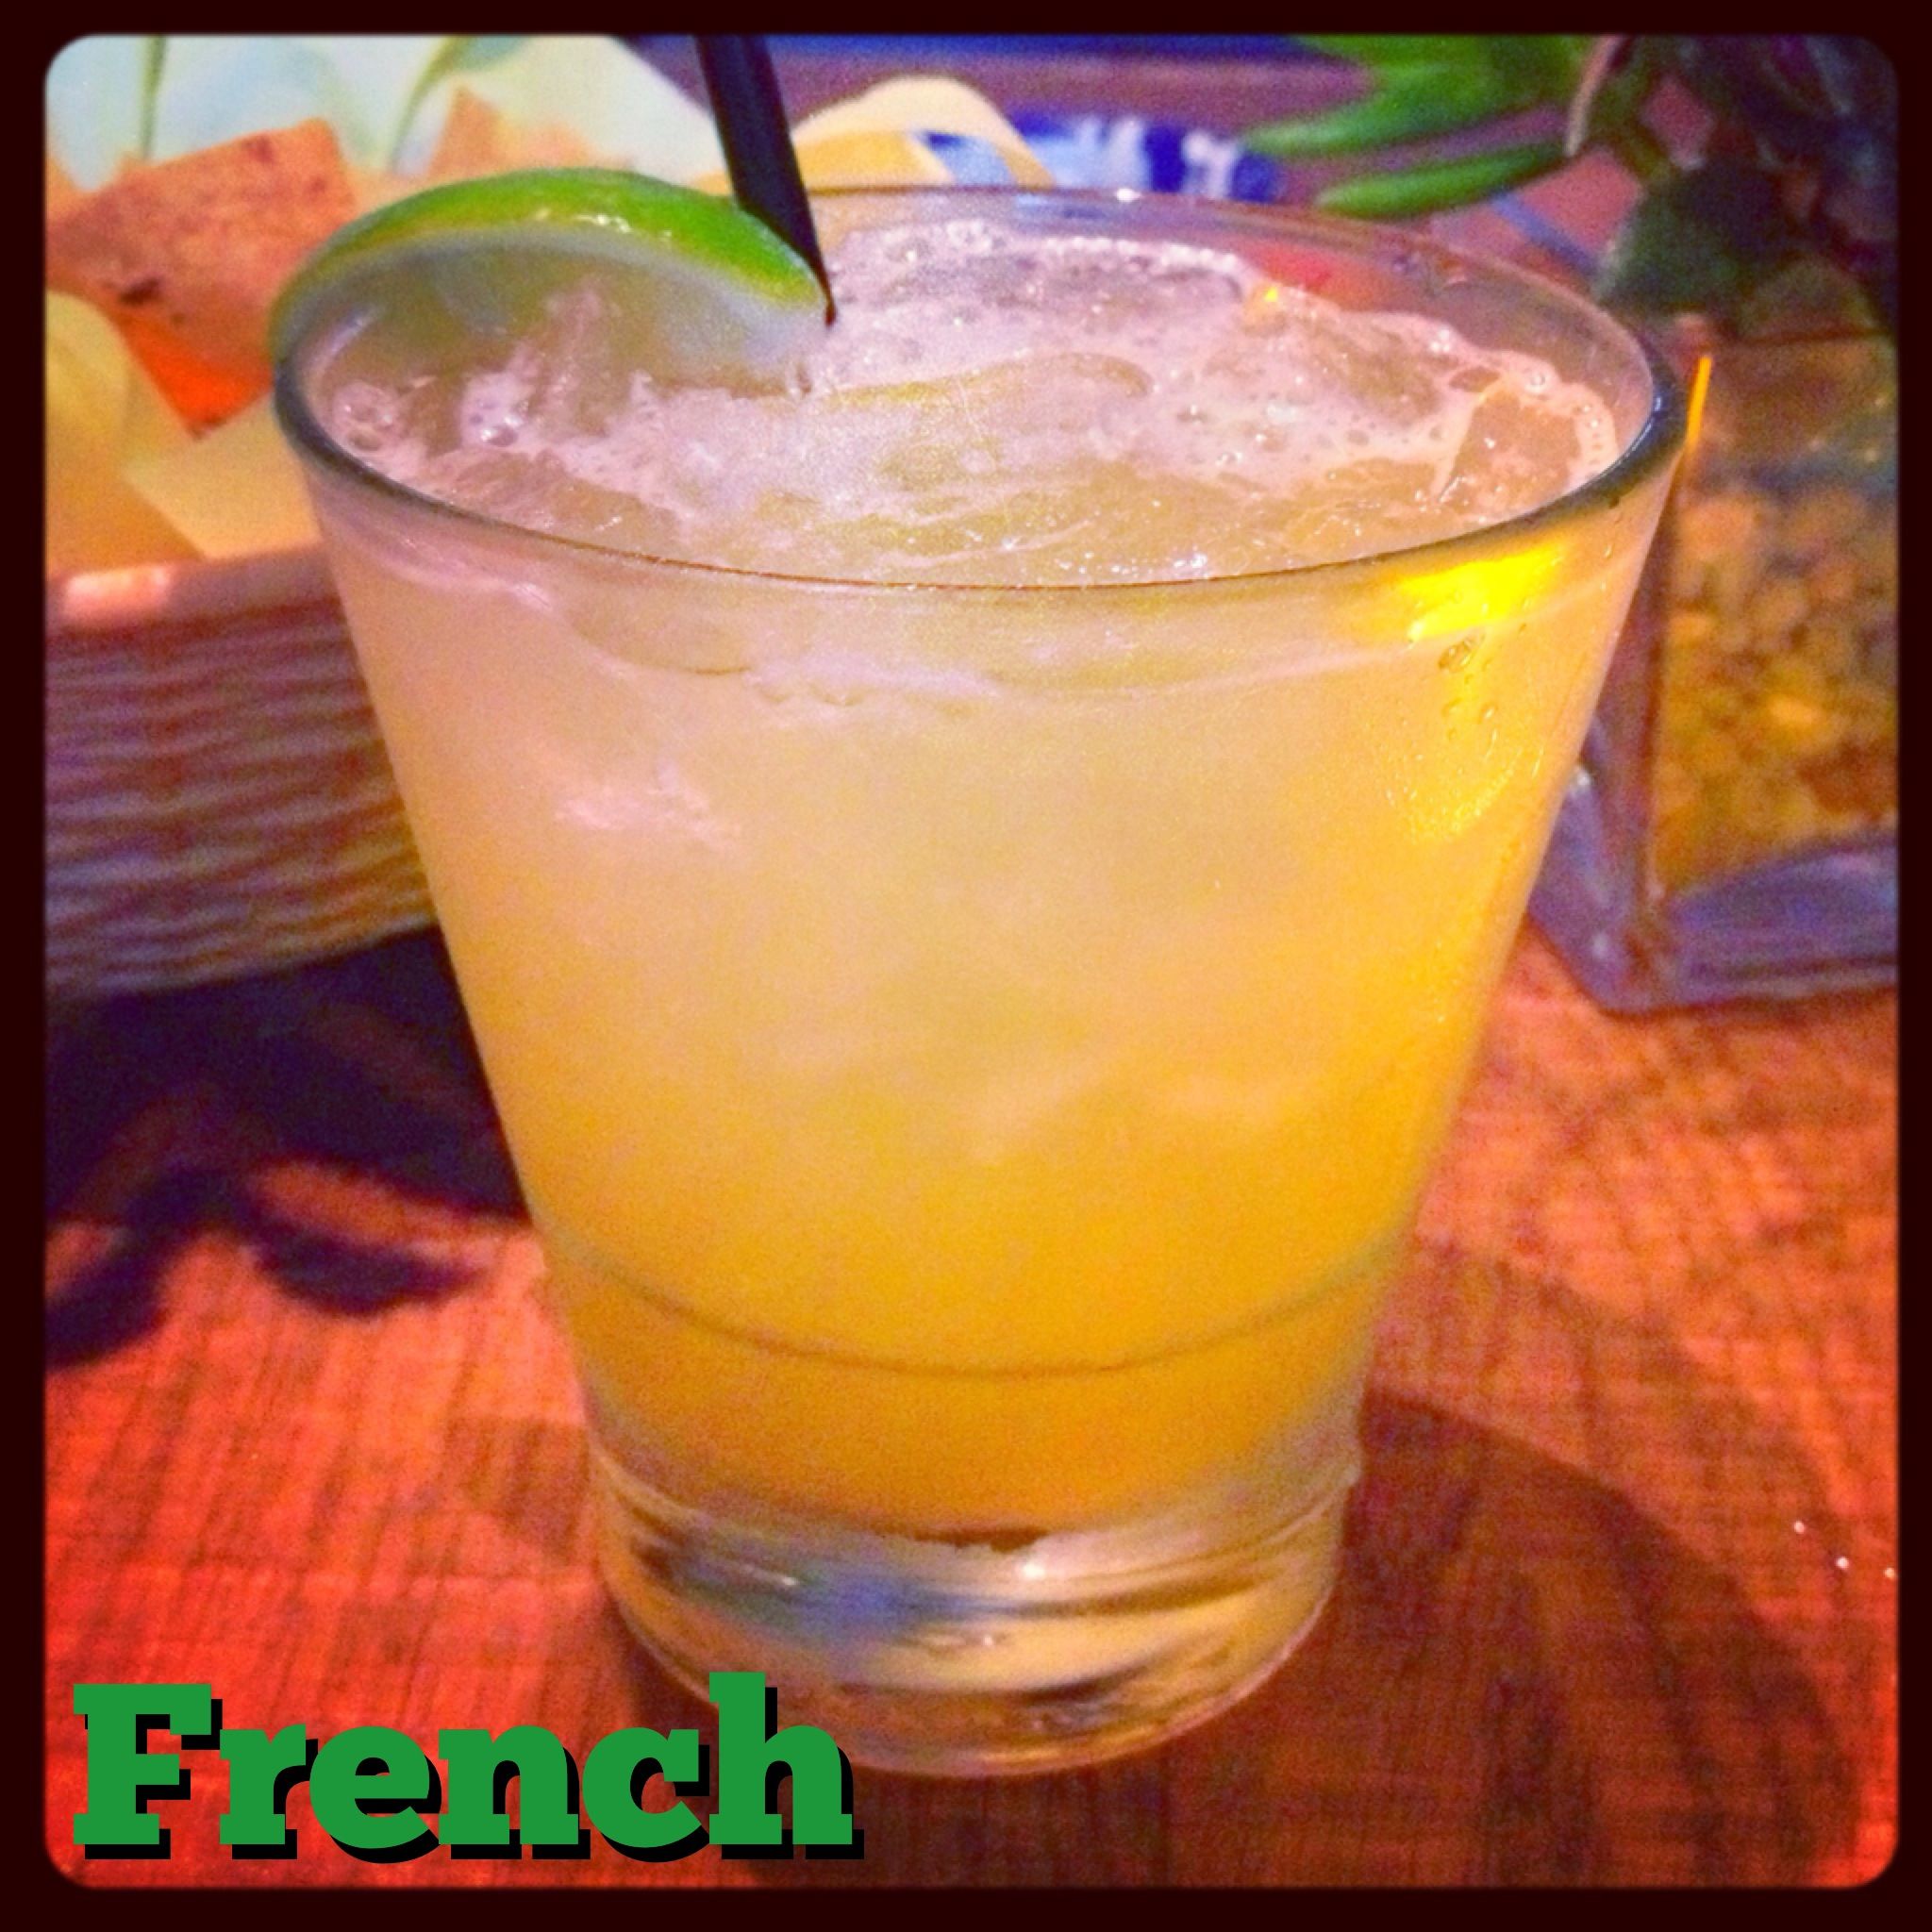 French Margarita from Miguel